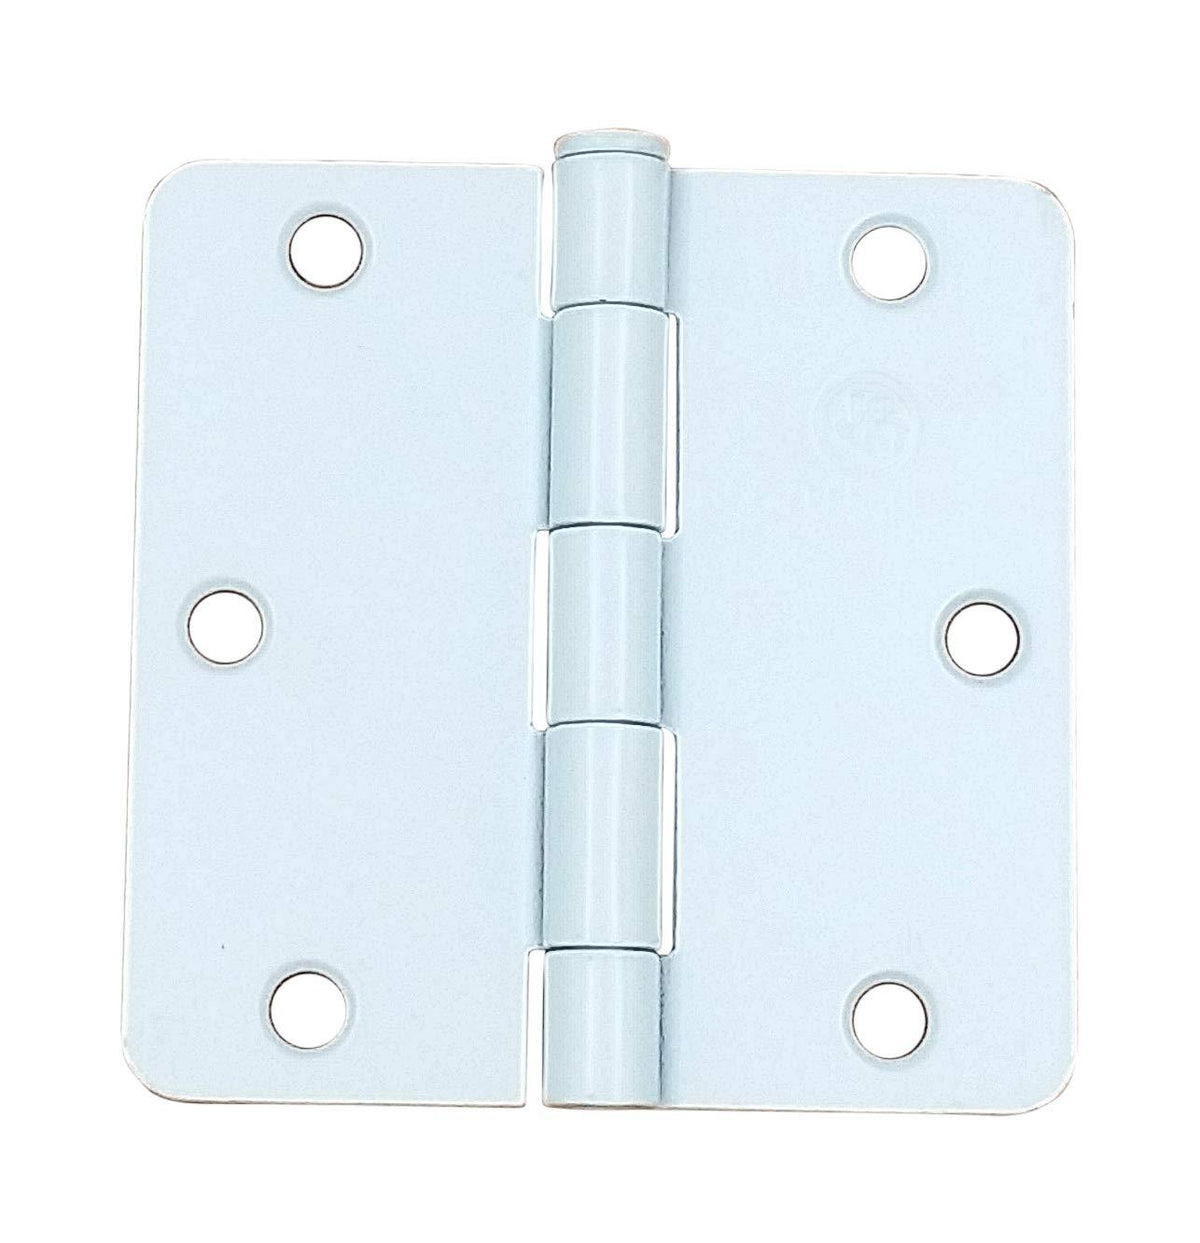 Residential Penrod Butt Hinge - Plain Bearing For Doors - 3 1/2 Inch With 1/4 Inch Radius Corner - Multiple Finishes Available - 2 Pack